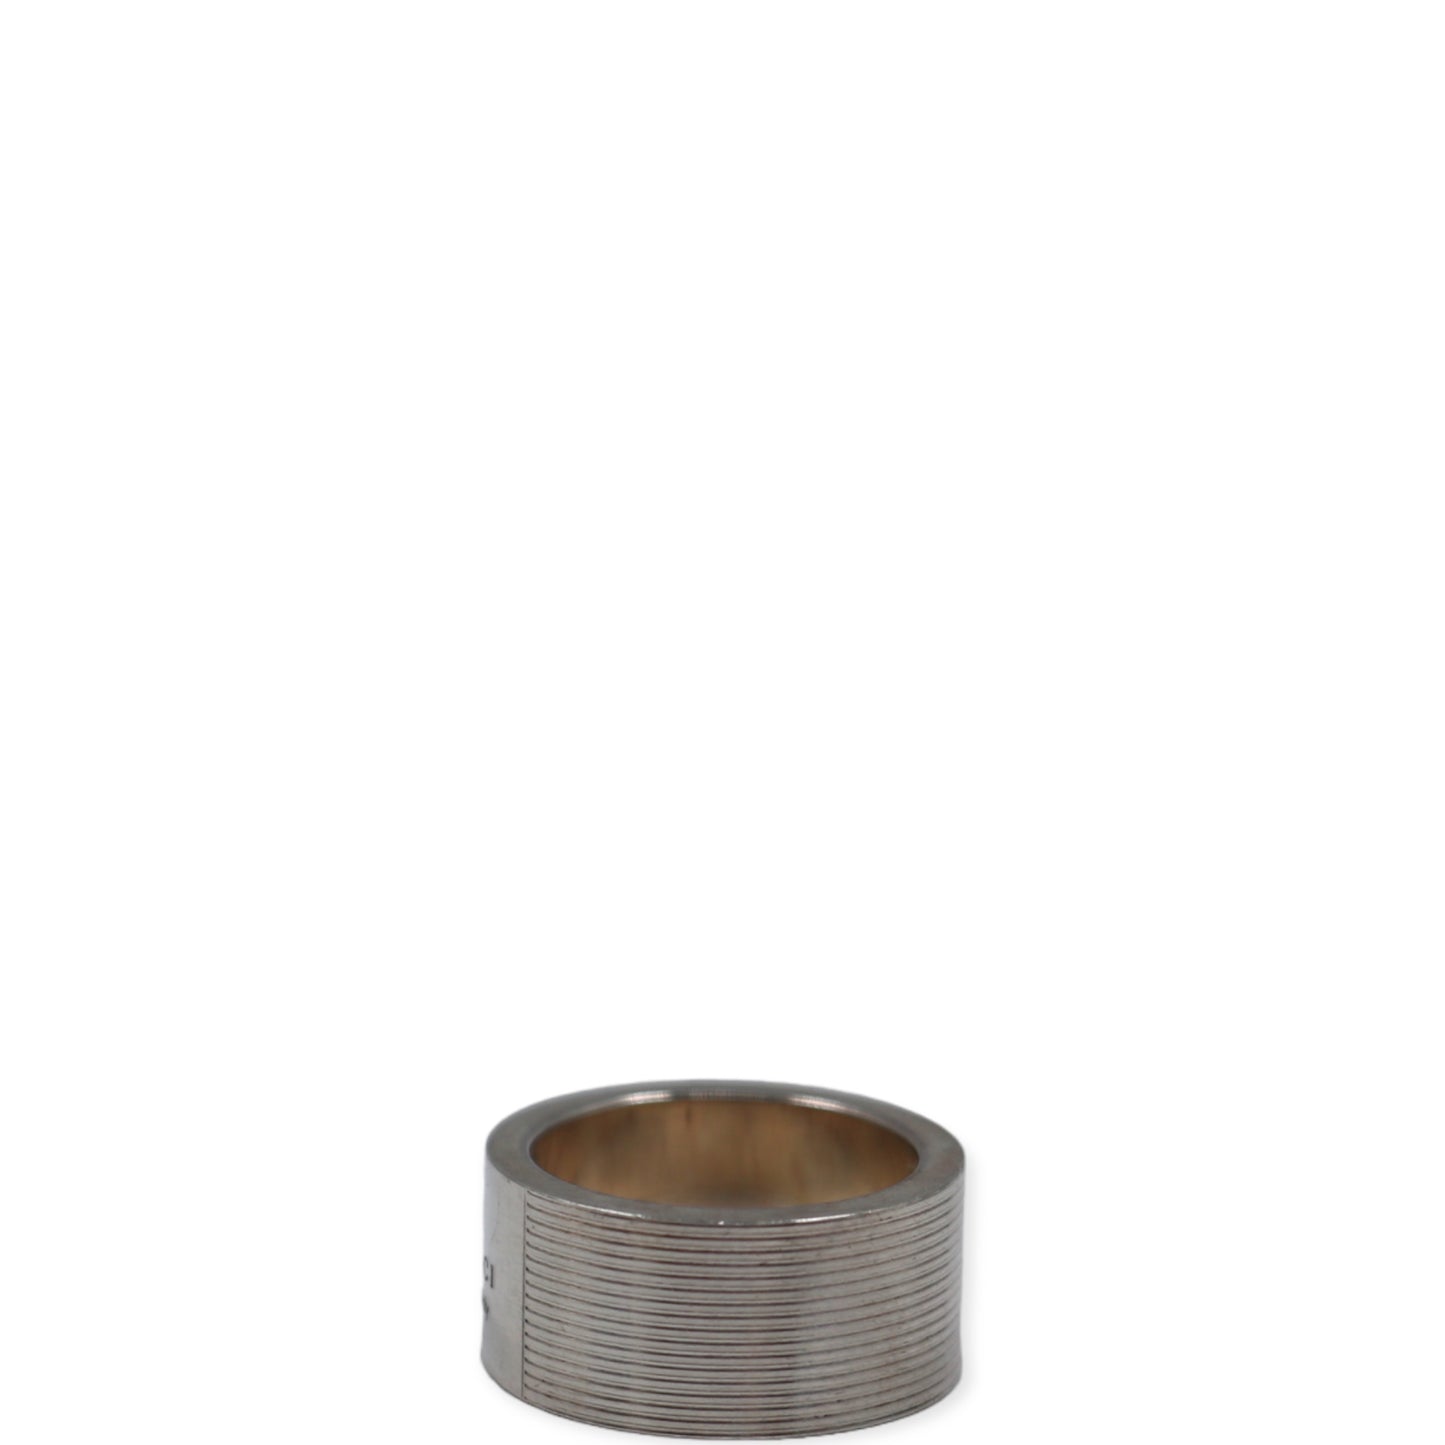 Gucci Ring silber